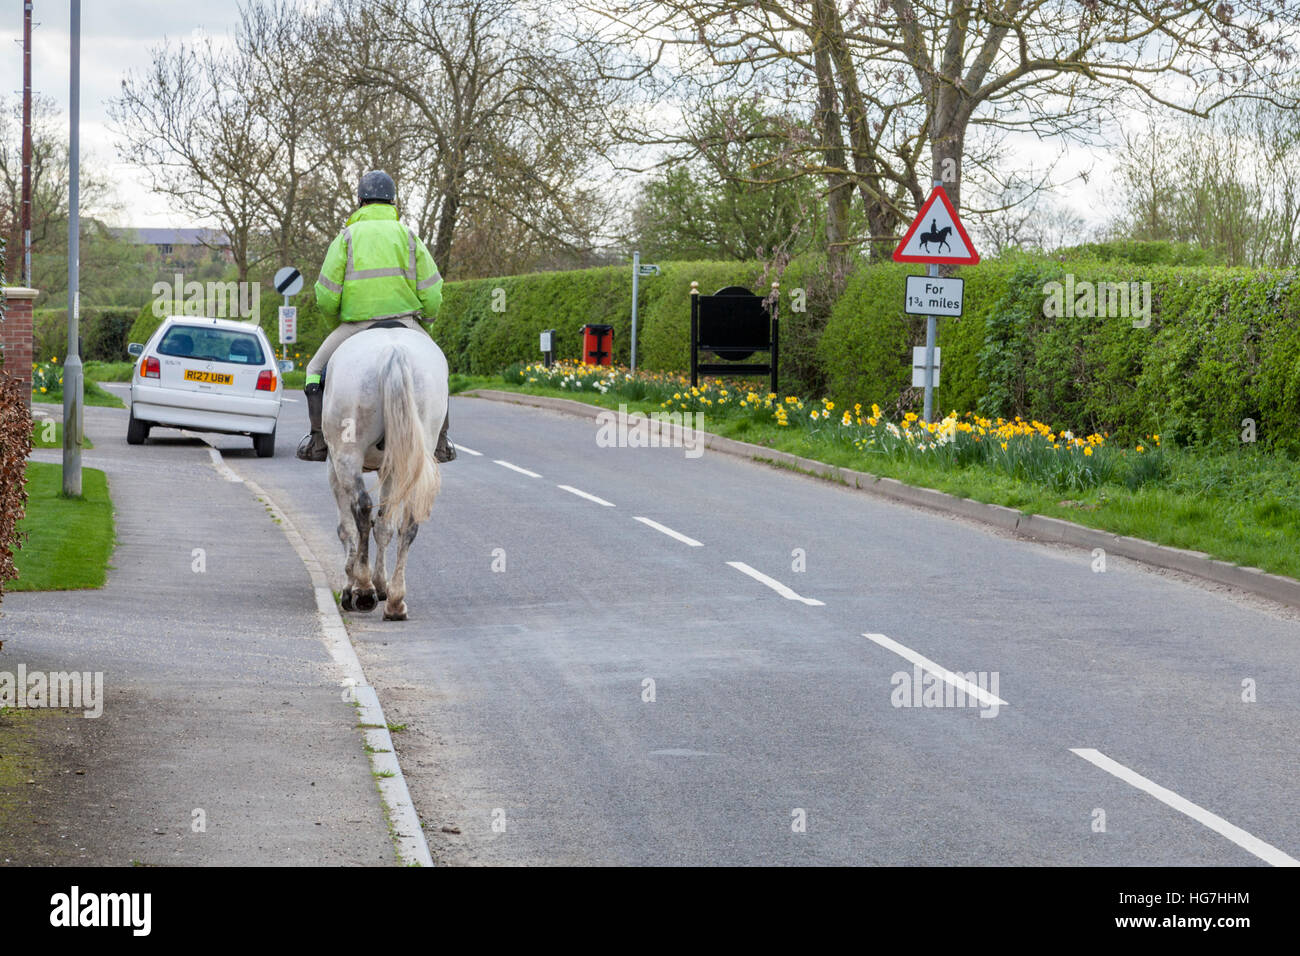 Man riding a horse on a rural road, Nottinghamshire, England, UK Stock Photo